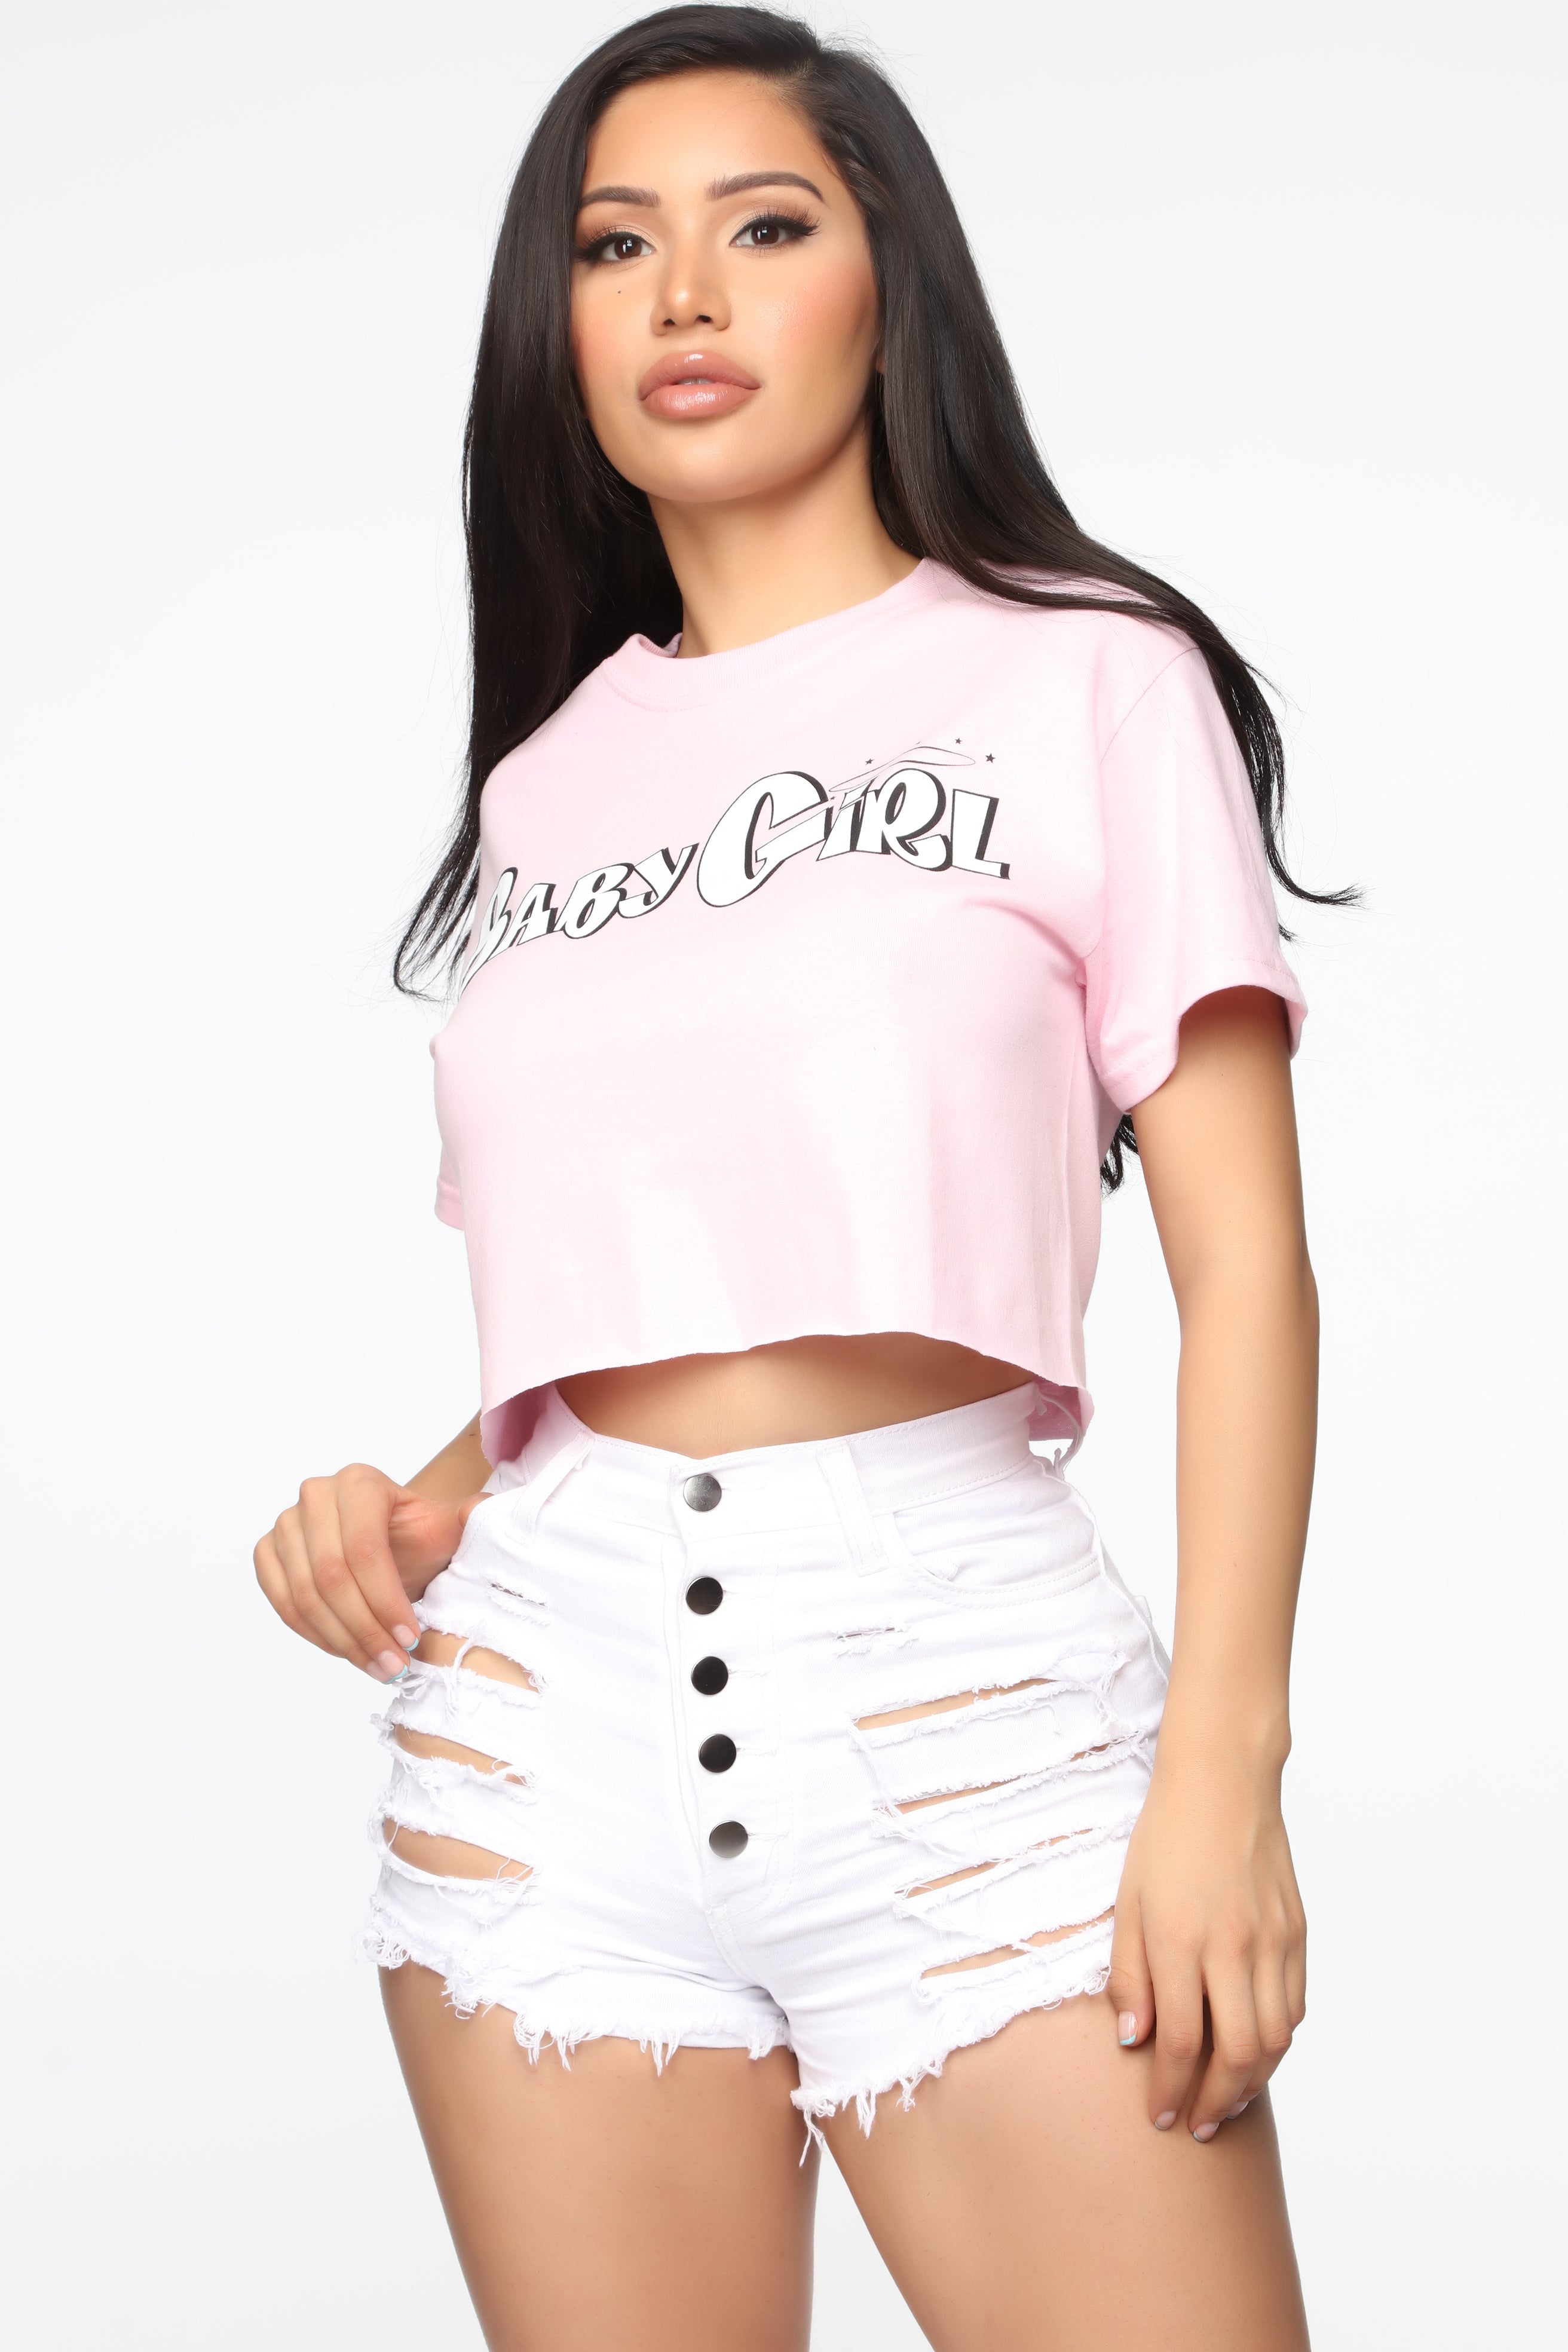 https://www.fashionnova/products/on-my-terms-blouse